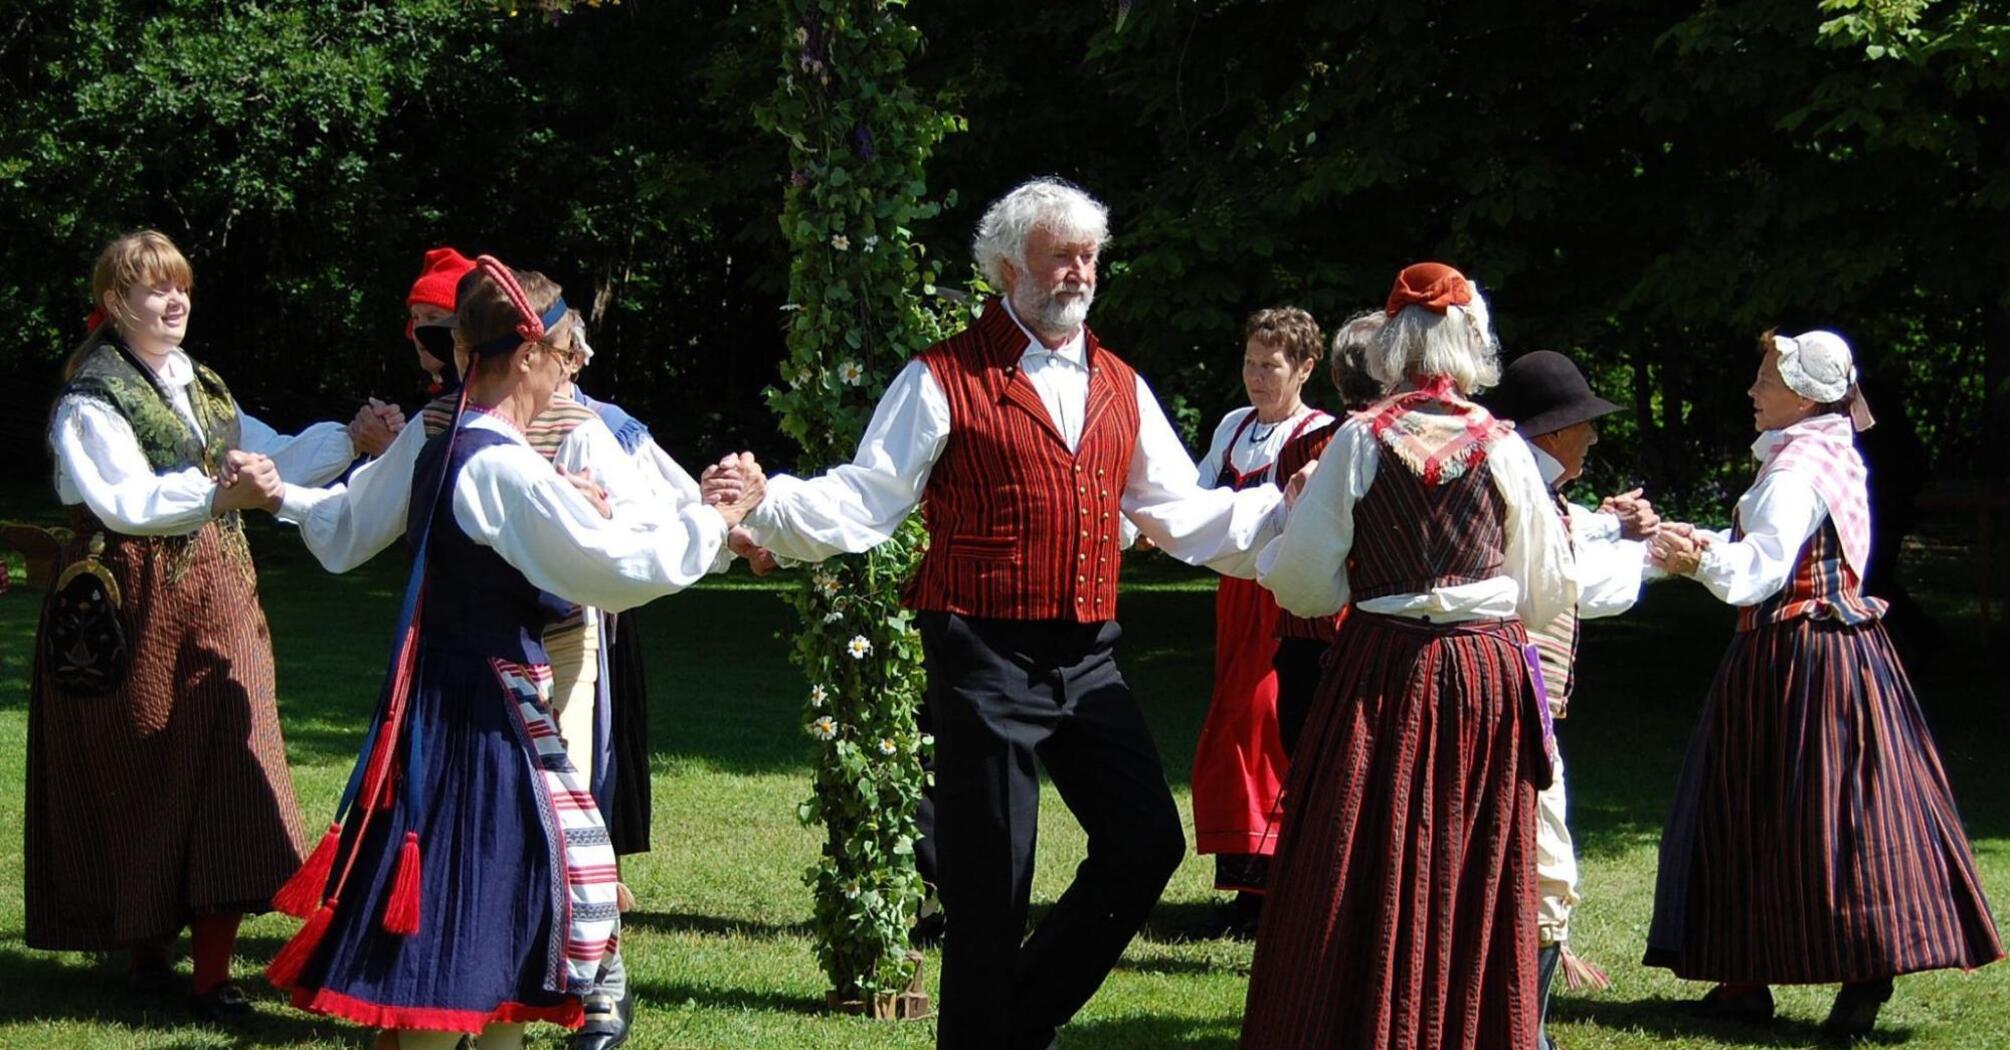 People celebrating the midsummer with traditional folk dance